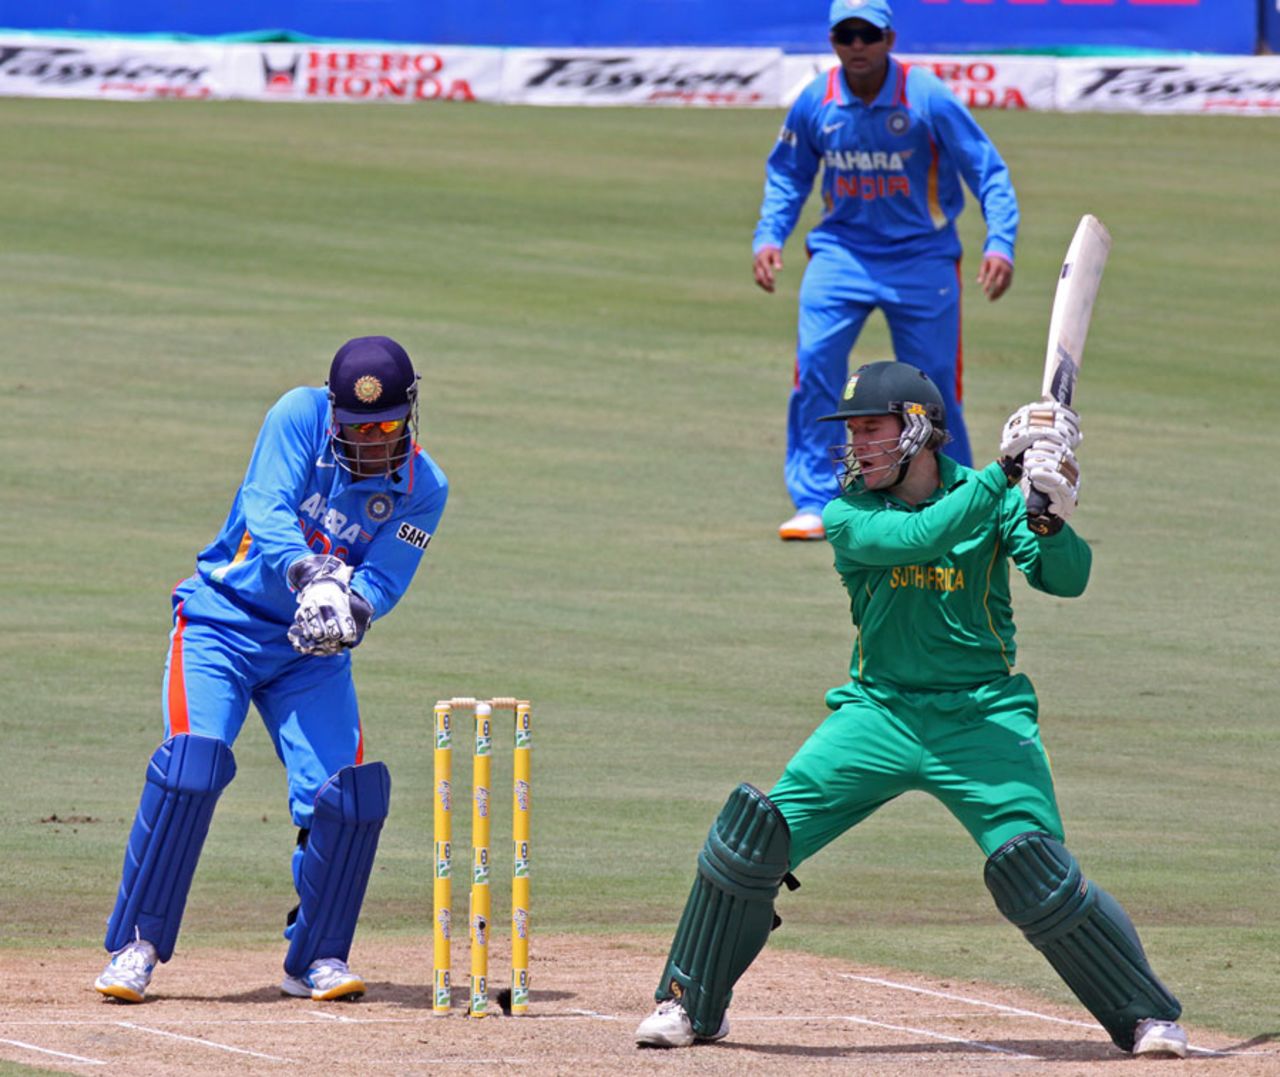 Morne van Wyk cuts during his half-century, South Africa v India, 5th ODI, Centurion, January 23, 2011